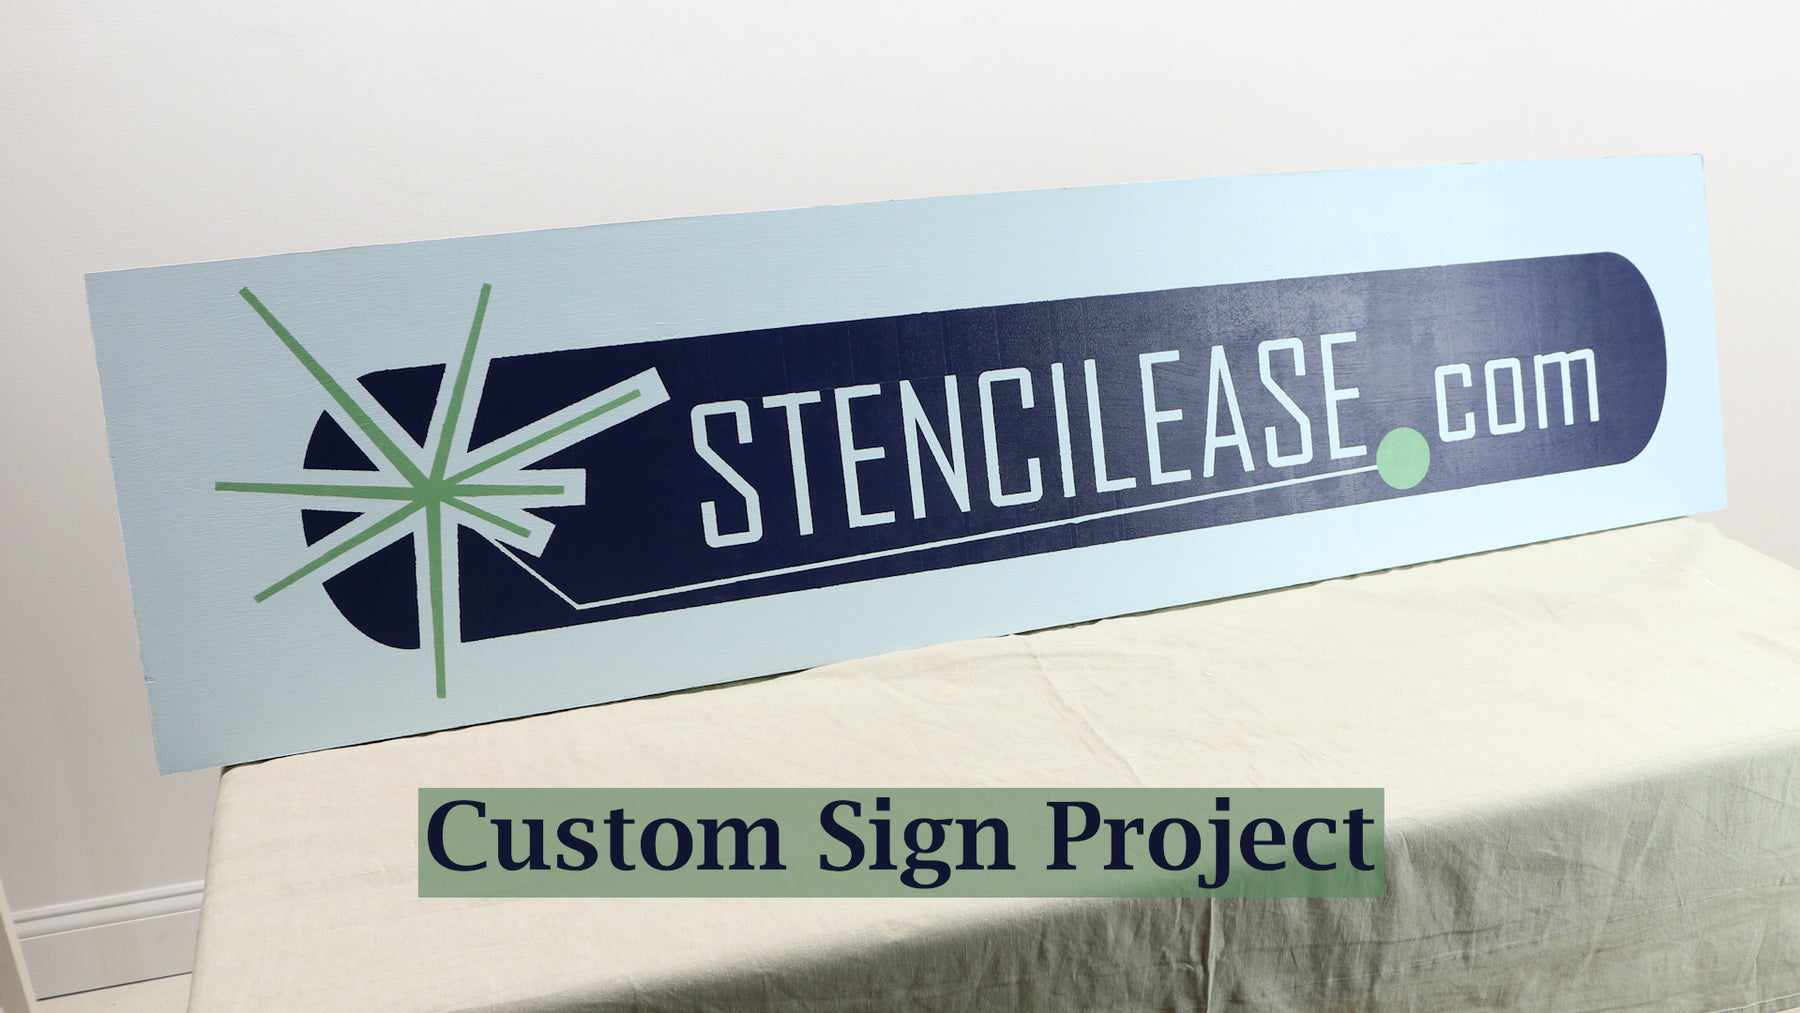 Custom Stenciled Sign Project | Stencil Ease.